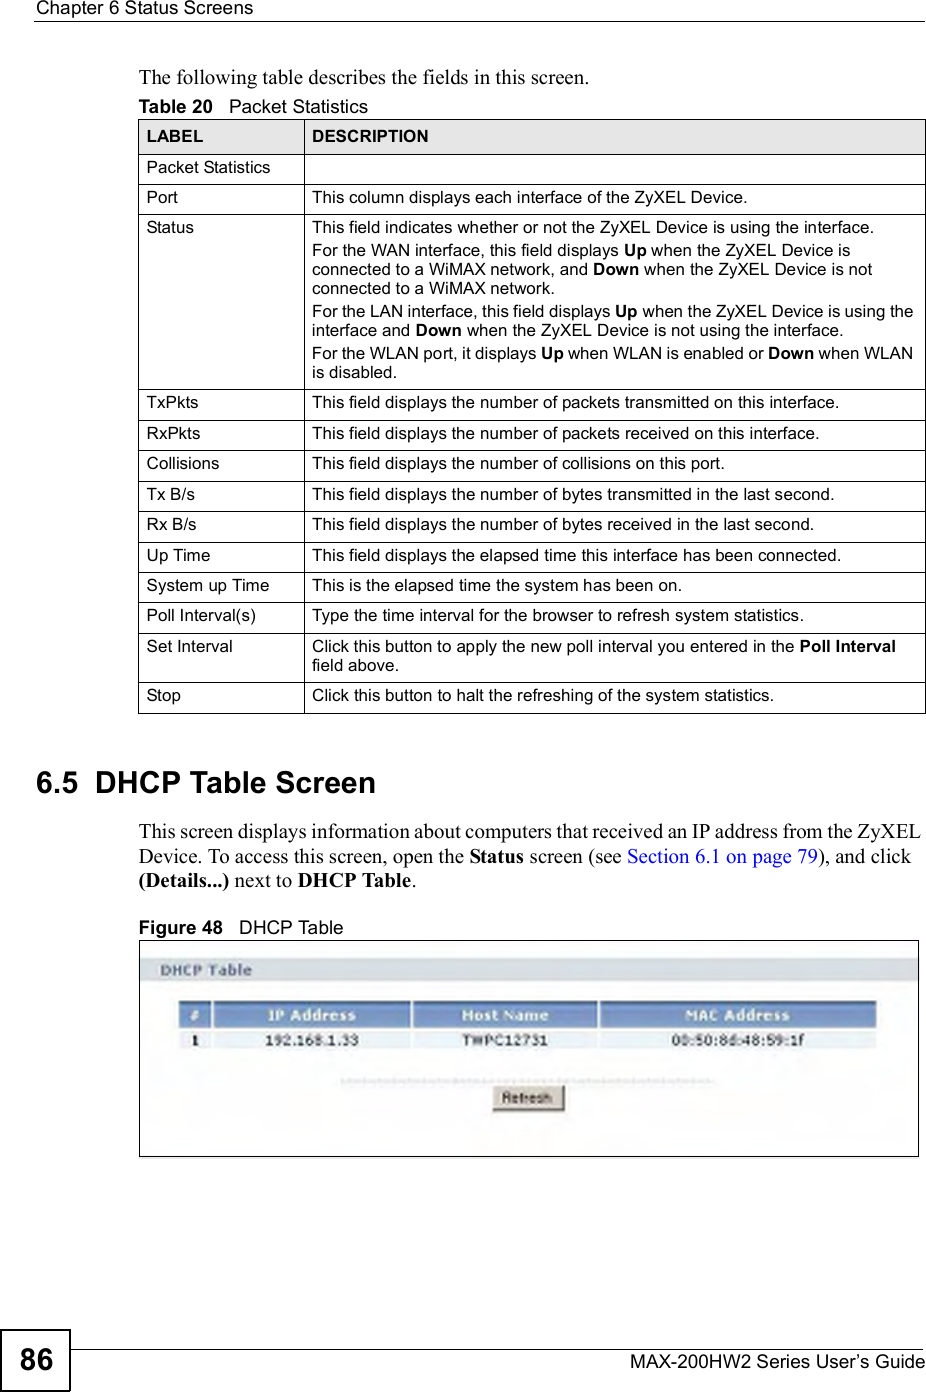 Chapter 6Status ScreensMAX-200HW2 Series User s Guide86The following table describes the fields in this screen.  6.5  DHCP Table ScreenThis screen displays information about computers that received an IP address from the ZyXEL Device. To access this screen, open the Status screen (see Section 6.1 on page 79), and click (Details...) next to DHCP Table.Figure 48   DHCP TableTable 20   Packet StatisticsLABEL DESCRIPTIONPacket StatisticsPortThis column displays each interface of the ZyXEL Device.Status  This field indicates whether or not the ZyXEL Device is using the interface.For the WAN interface, this field displays Up when the ZyXEL Device is connected to a WiMAX network, and Down when the ZyXEL Device is not connected to a WiMAX network.For the LAN interface, this field displays Up when the ZyXEL Device is using the interface and Down when the ZyXEL Device is not using the interface.For the WLAN port, it displays Up when WLAN is enabled or Down when WLAN is disabled.TxPkts  This field displays the number of packets transmitted on this interface.RxPkts  This field displays the number of packets received on this interface.Collisions This field displays the number of collisions on this port.Tx B/s  This field displays the number of bytes transmitted in the last second.Rx B/s This field displays the number of bytes received in the last second.Up Time  This field displays the elapsed time this interface has been connected. System up Time This is the elapsed time the system has been on.Poll Interval(s) Type the time interval for the browser to refresh system statistics.Set Interval Click this button to apply the new poll interval you entered in the Poll Intervalfield above.Stop Click this button to halt the refreshing of the system statistics.